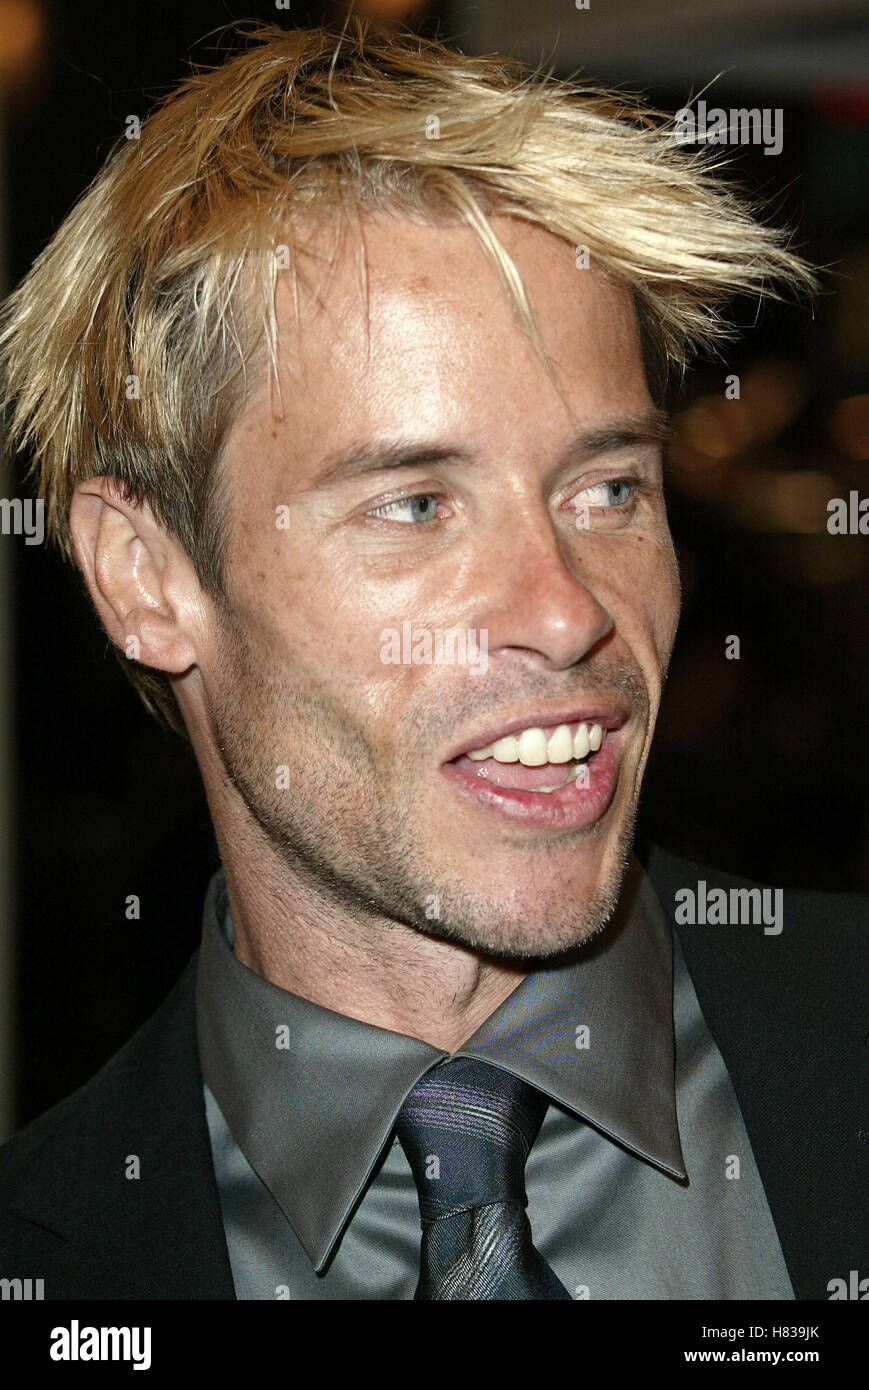 GUY PEARCE THE TIME MACHINE FILM PREMIERE WESTWOOD LOS ANGELES USA 04 March 2002 Stock Photo